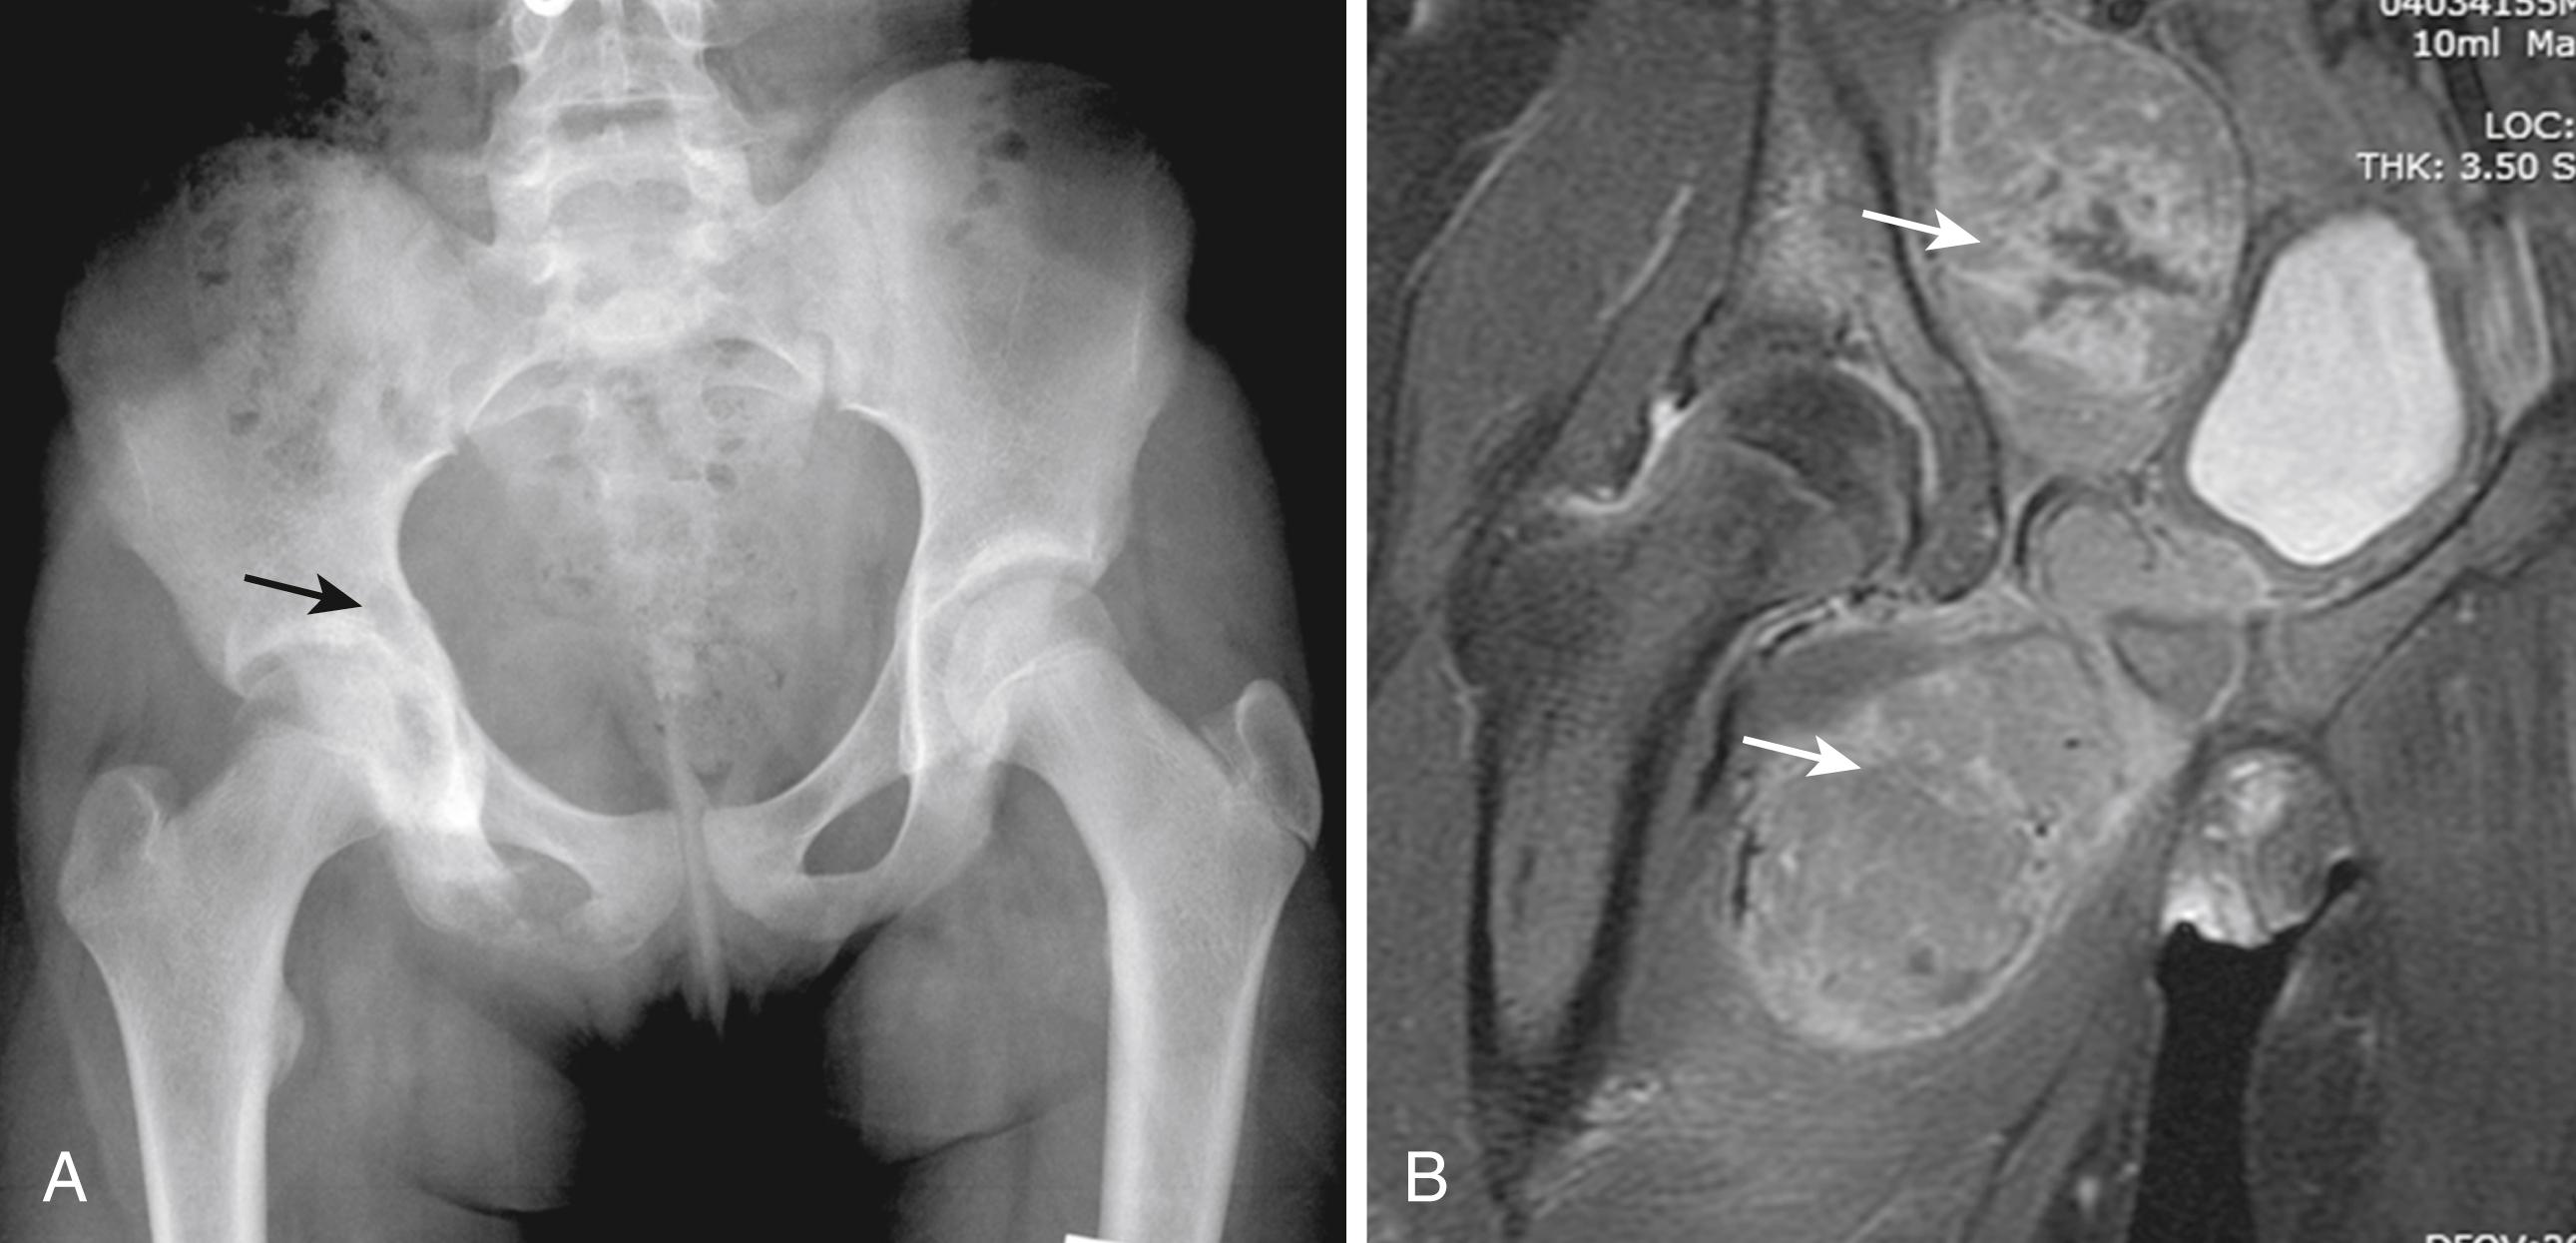 Fig. 47.4, Ewing sarcoma of the right ischium in a 12-year-old boy. A, Plain radiograph demonstrates lytic lesion. B, Magnetic resonance imaging (MRI) indicates extent of soft tissue tumor mass.